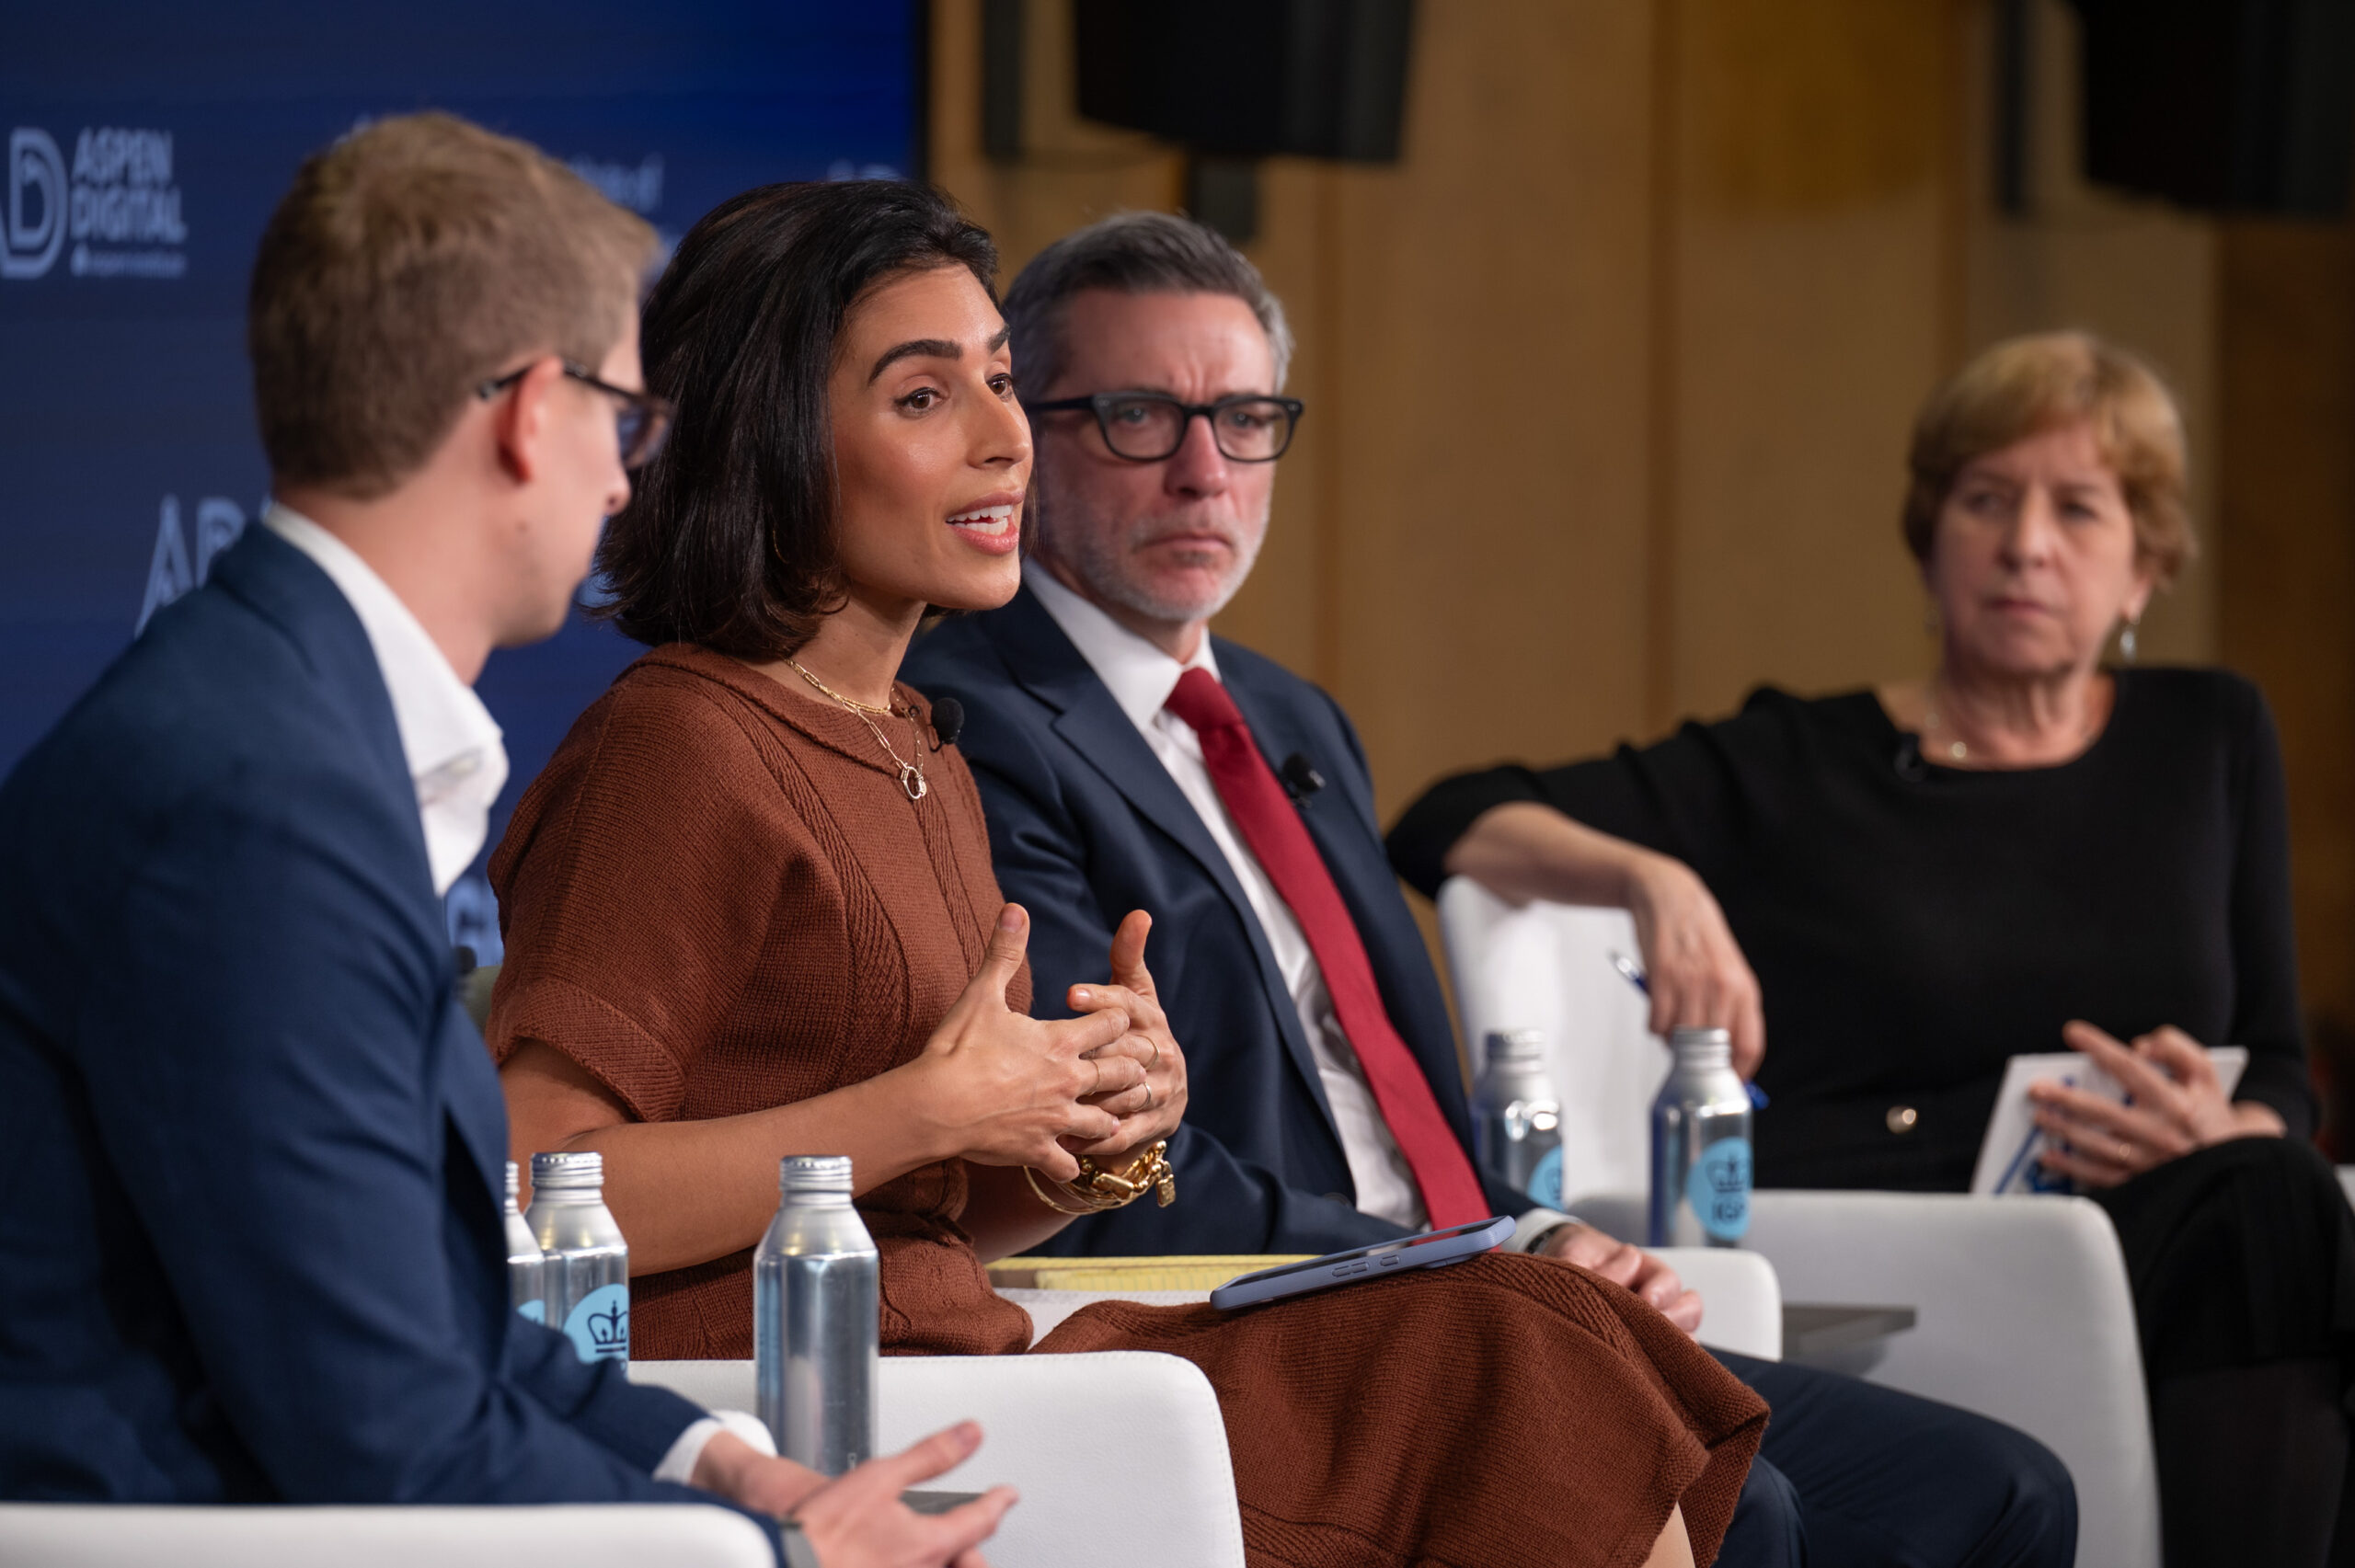 A photo from the event on the AI election threat. From left to right: David Agranovich of Global Threat Disruption, Yasmin Green of Jigsaw (Google), Clint Watts of Microsoft Threat Analysis Center, and Vivian Schiller of Aspen Digital.